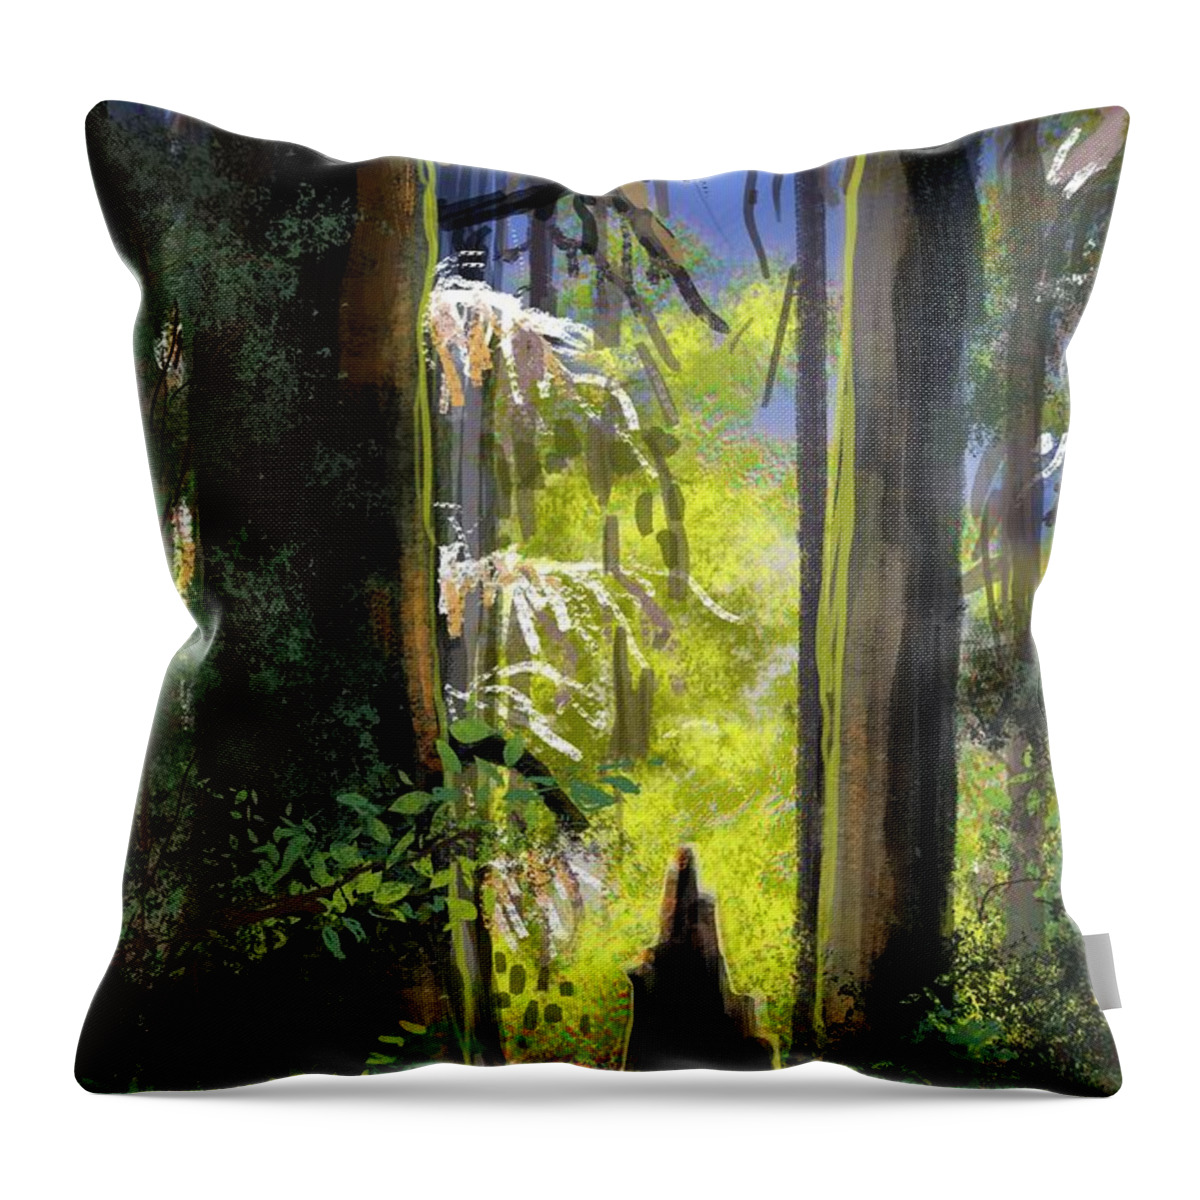 Redwoods Throw Pillow featuring the digital art Redwoods by Don Morgan